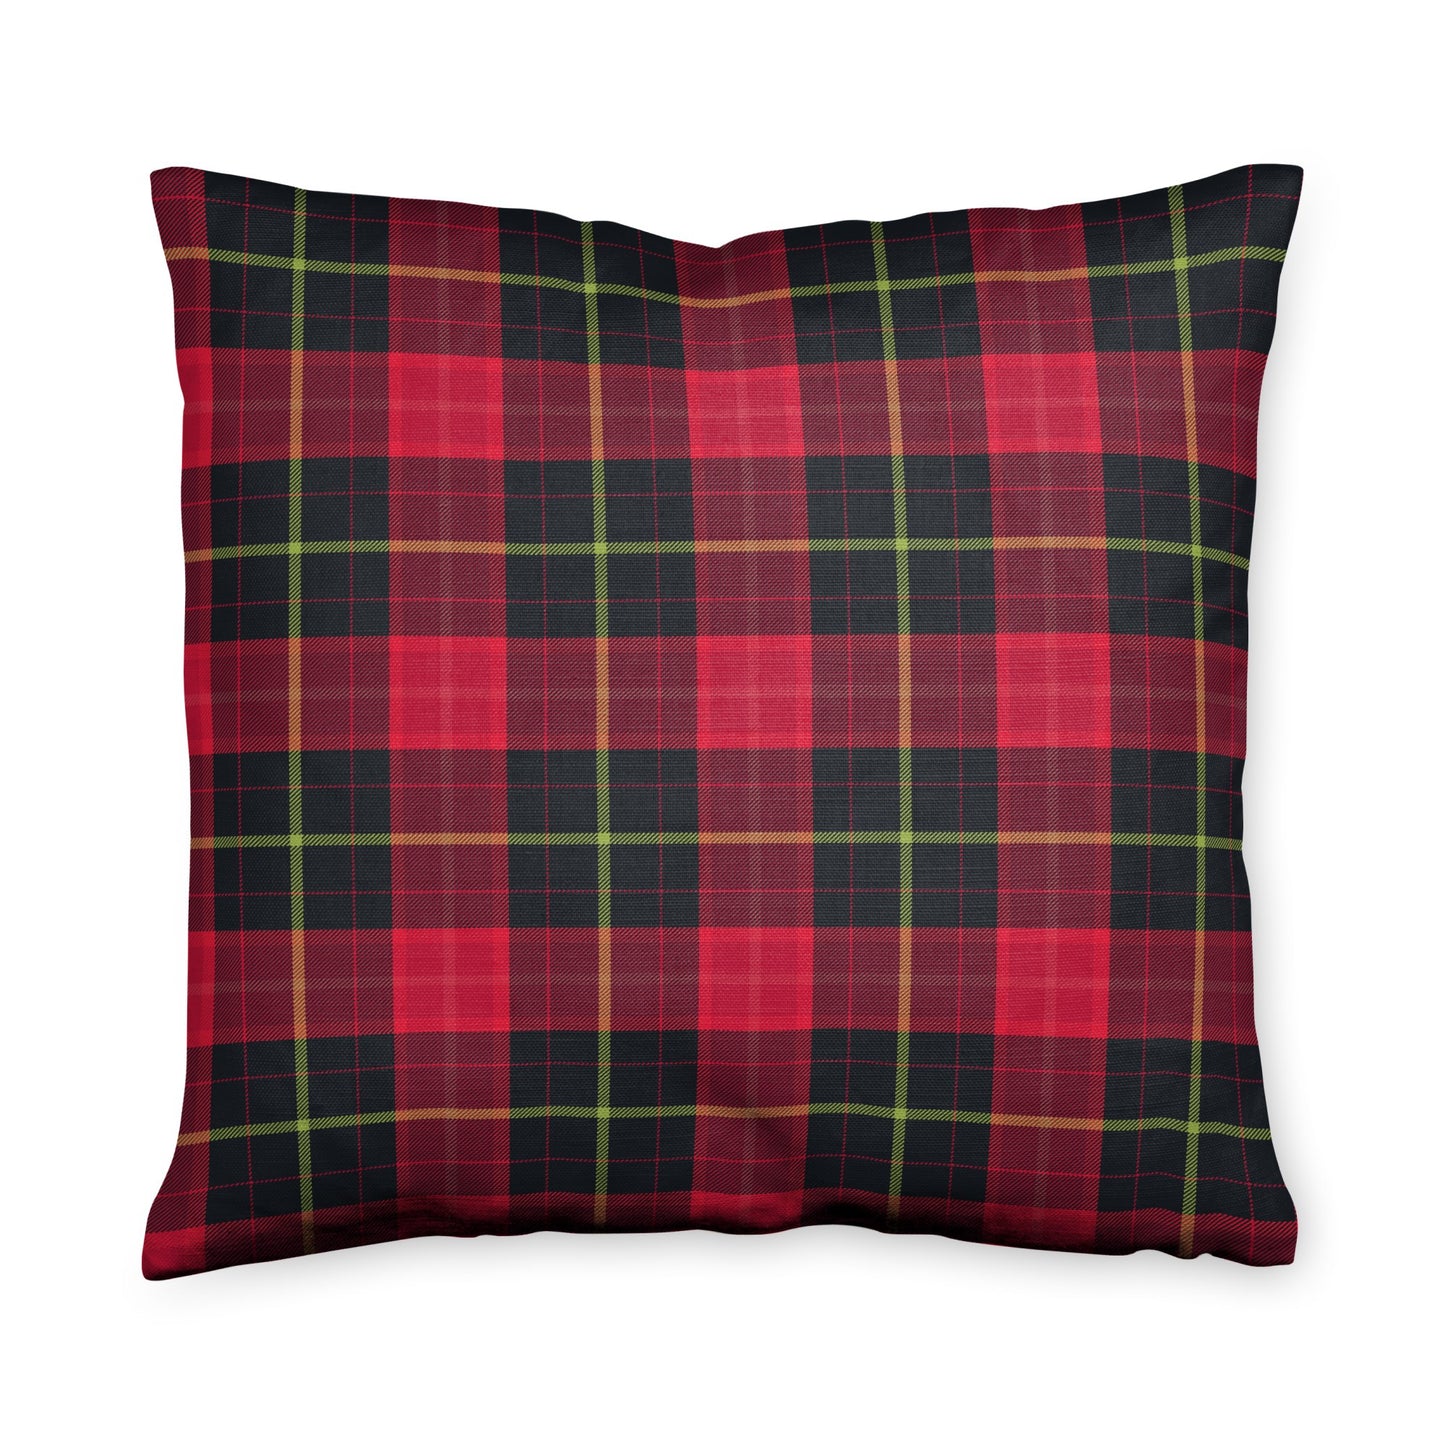 Red Plaid Throw Pillow - shades and stripes of green and red with gold or yellow mixed in